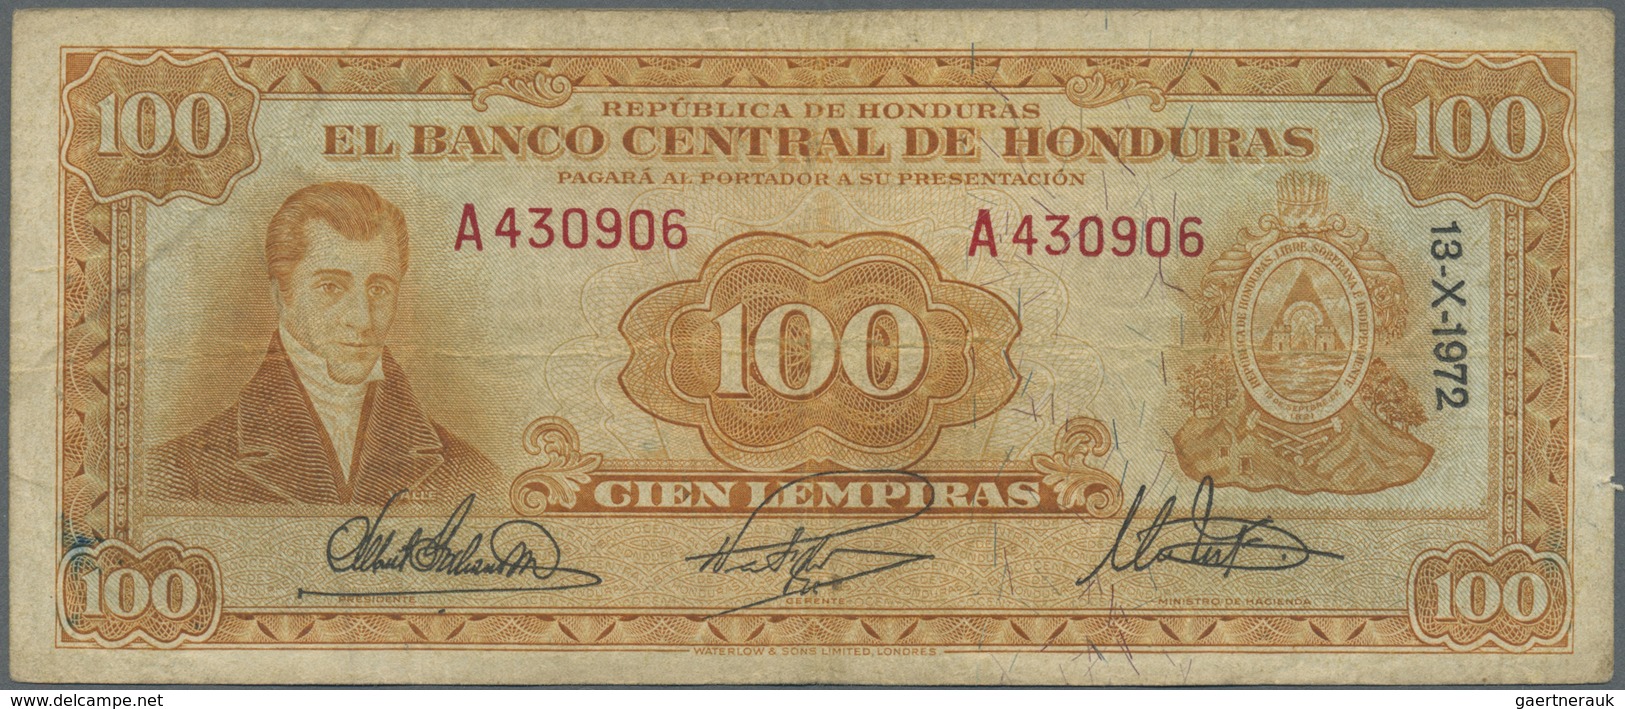 Honduras: 100 Lempiras 1972 P. 49d, Used With Folds And Creases, Stained Paper, 2 Pinholes, But No T - Honduras